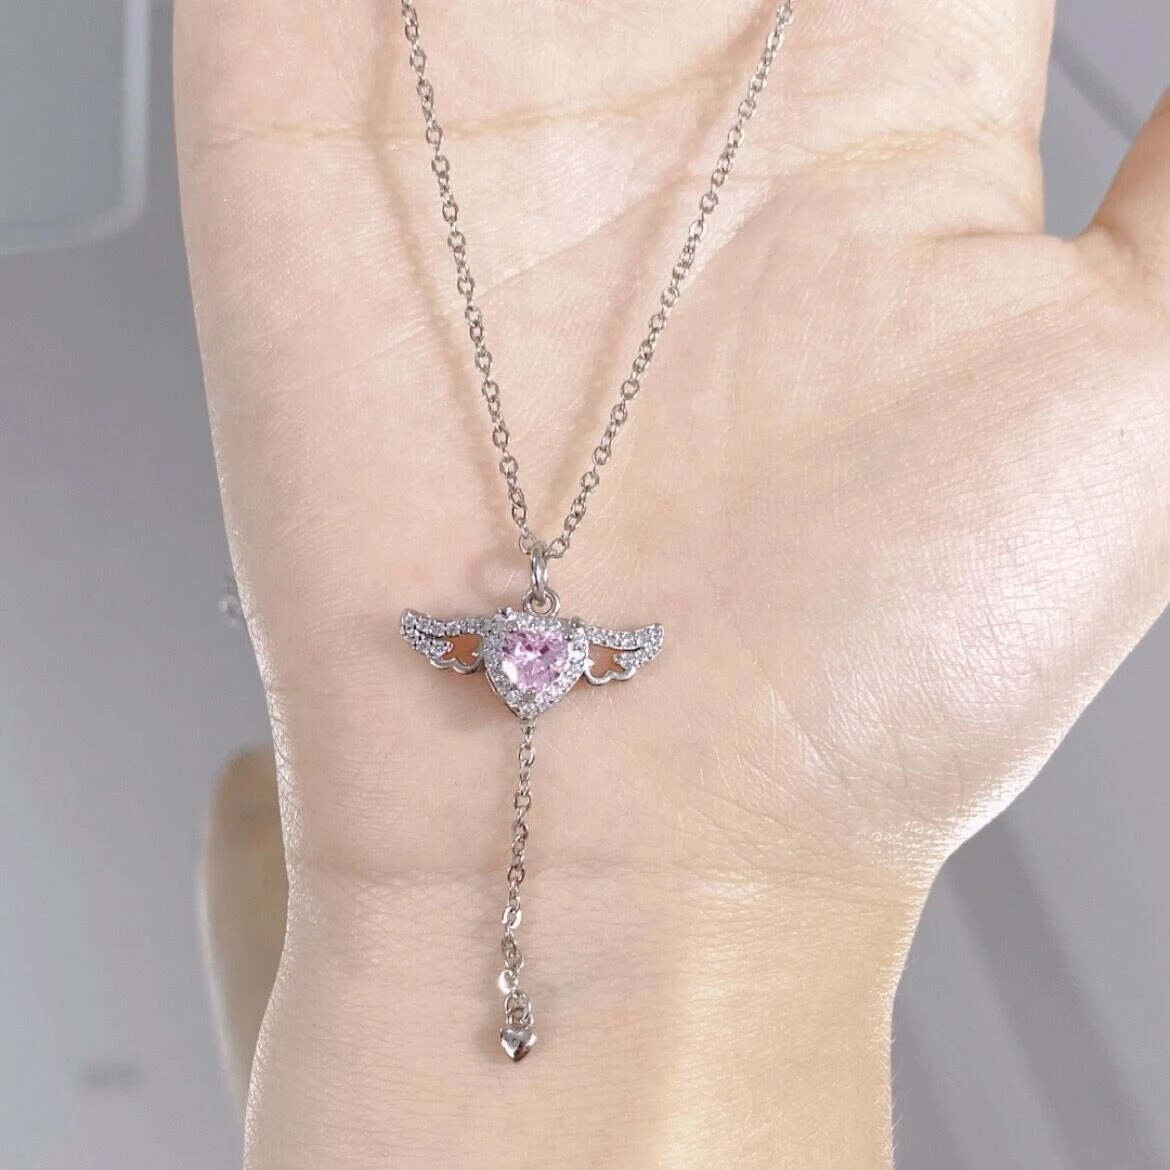 💗Mother's Day Sale 50% OFF🔥Pink Crystal Angel Wings Heart Pendant Necklace - Buy 2 Get 1 & Free Shipping